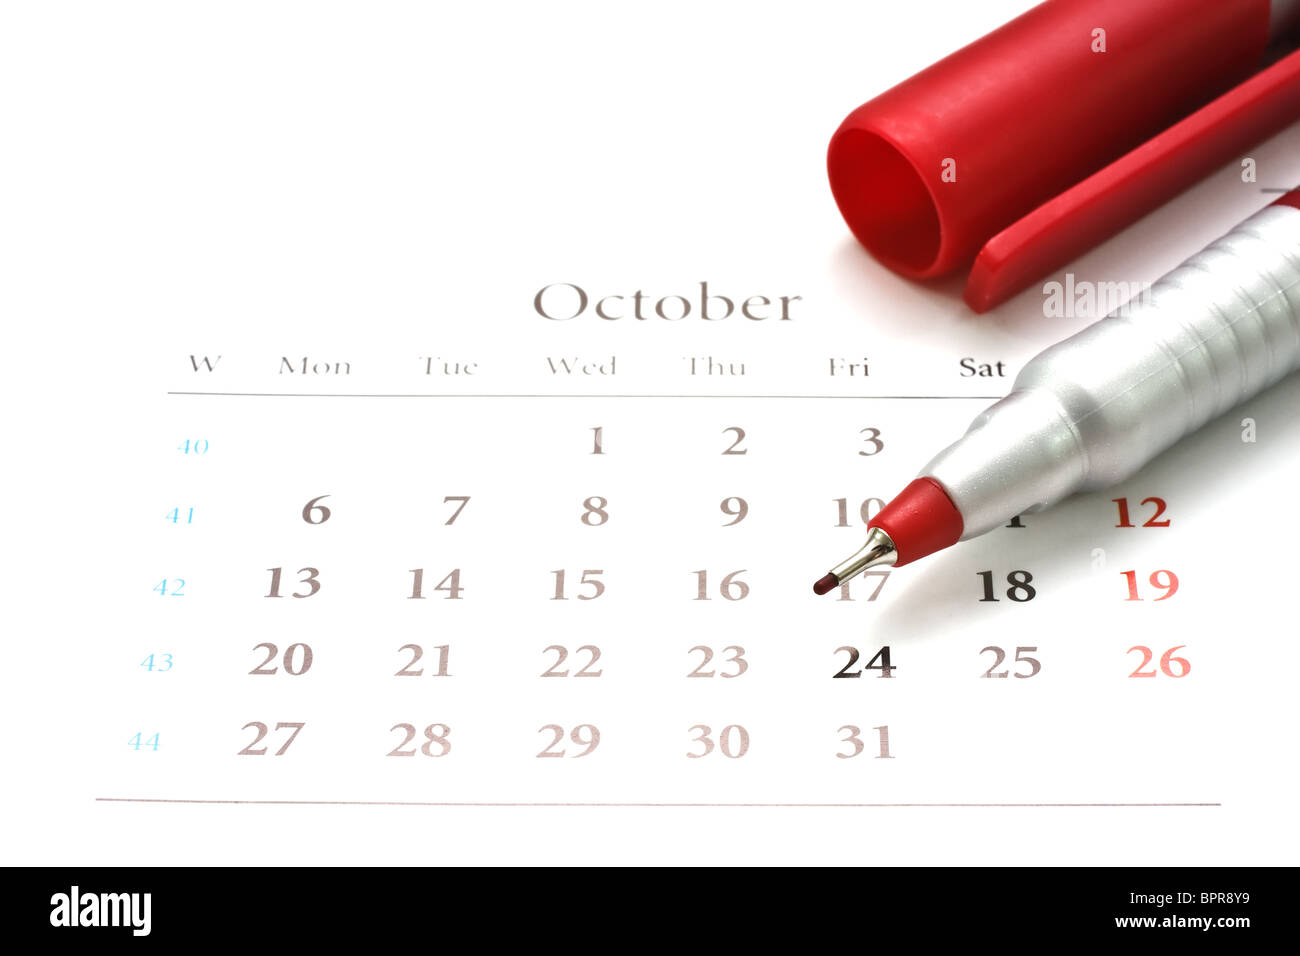 Red pen on a calendar of October. Stock Photo